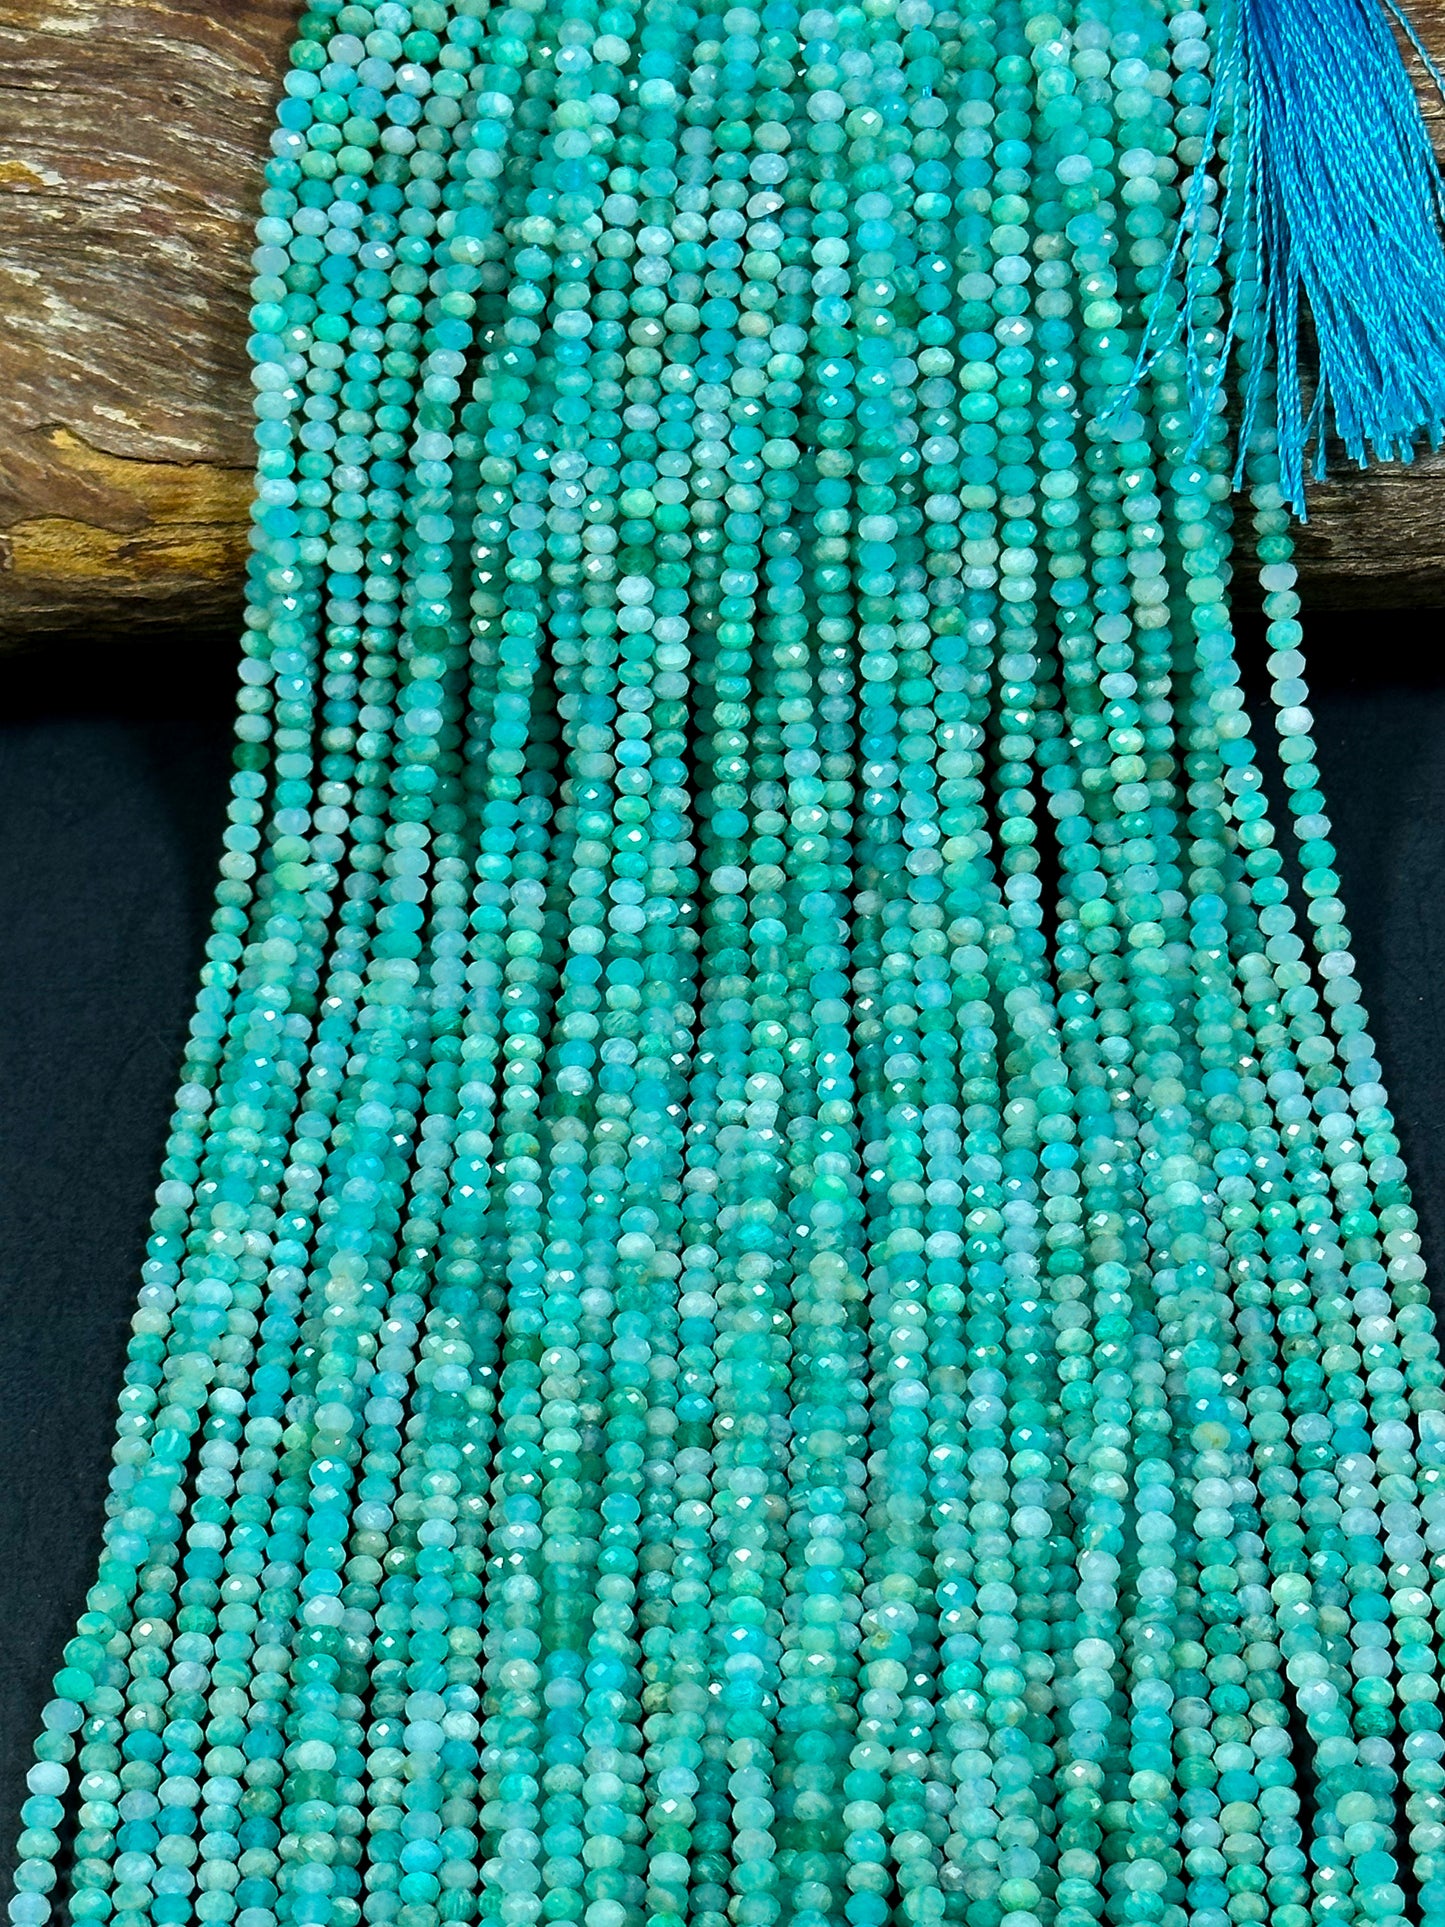 NATURAL Amazonite Gemstone Bead Faceted 3mm Rondelle Shape Bead, Beautiful Natural Green Blue Color Amazonite Loose Beads Full Strand 15.5"